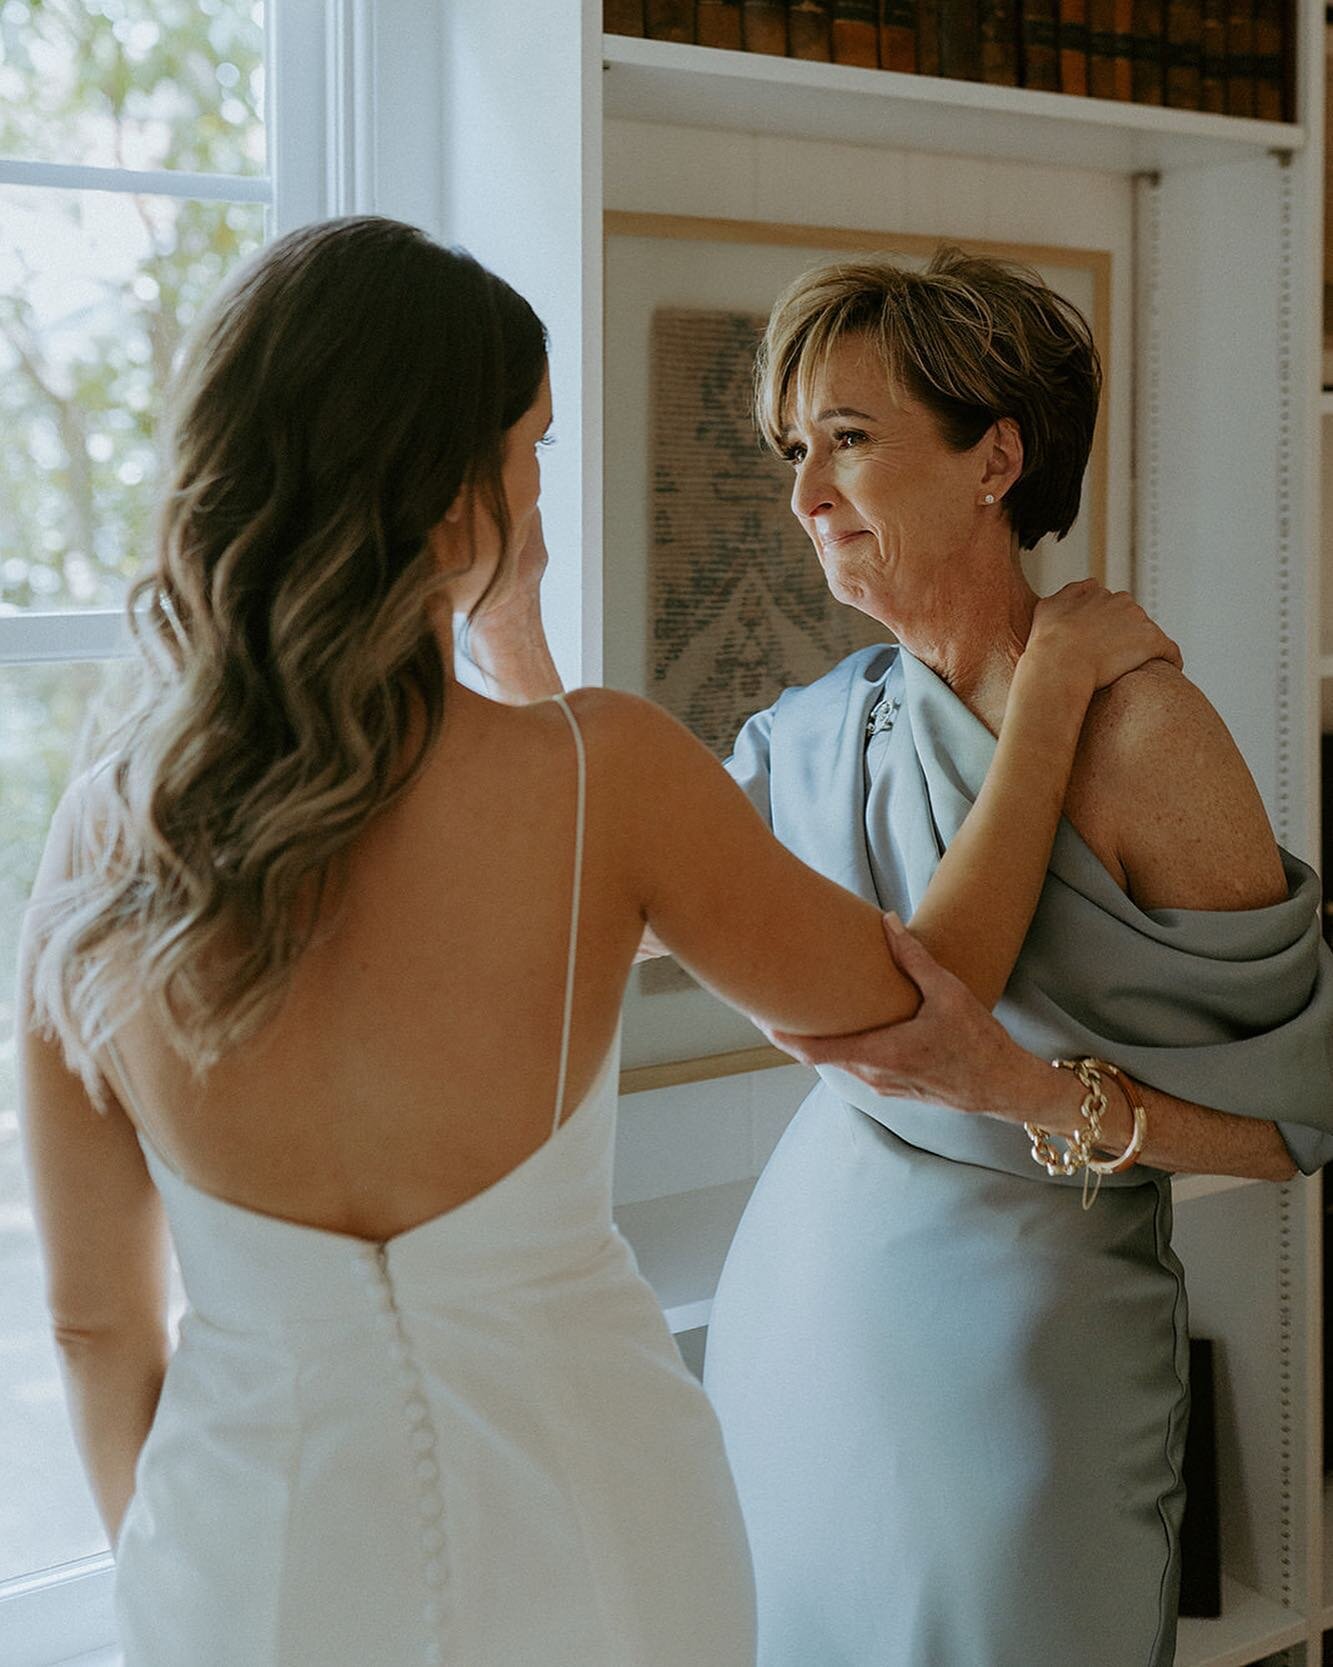 The sweetest moments, there is nothing like a mother's love 🤍

(And there's so much more where this came from! See reel for more.)

Happy Mother's Day! 

📷: @hellokatiewilson | @beprettycharlotte | @lovelybridechs | @louvienne